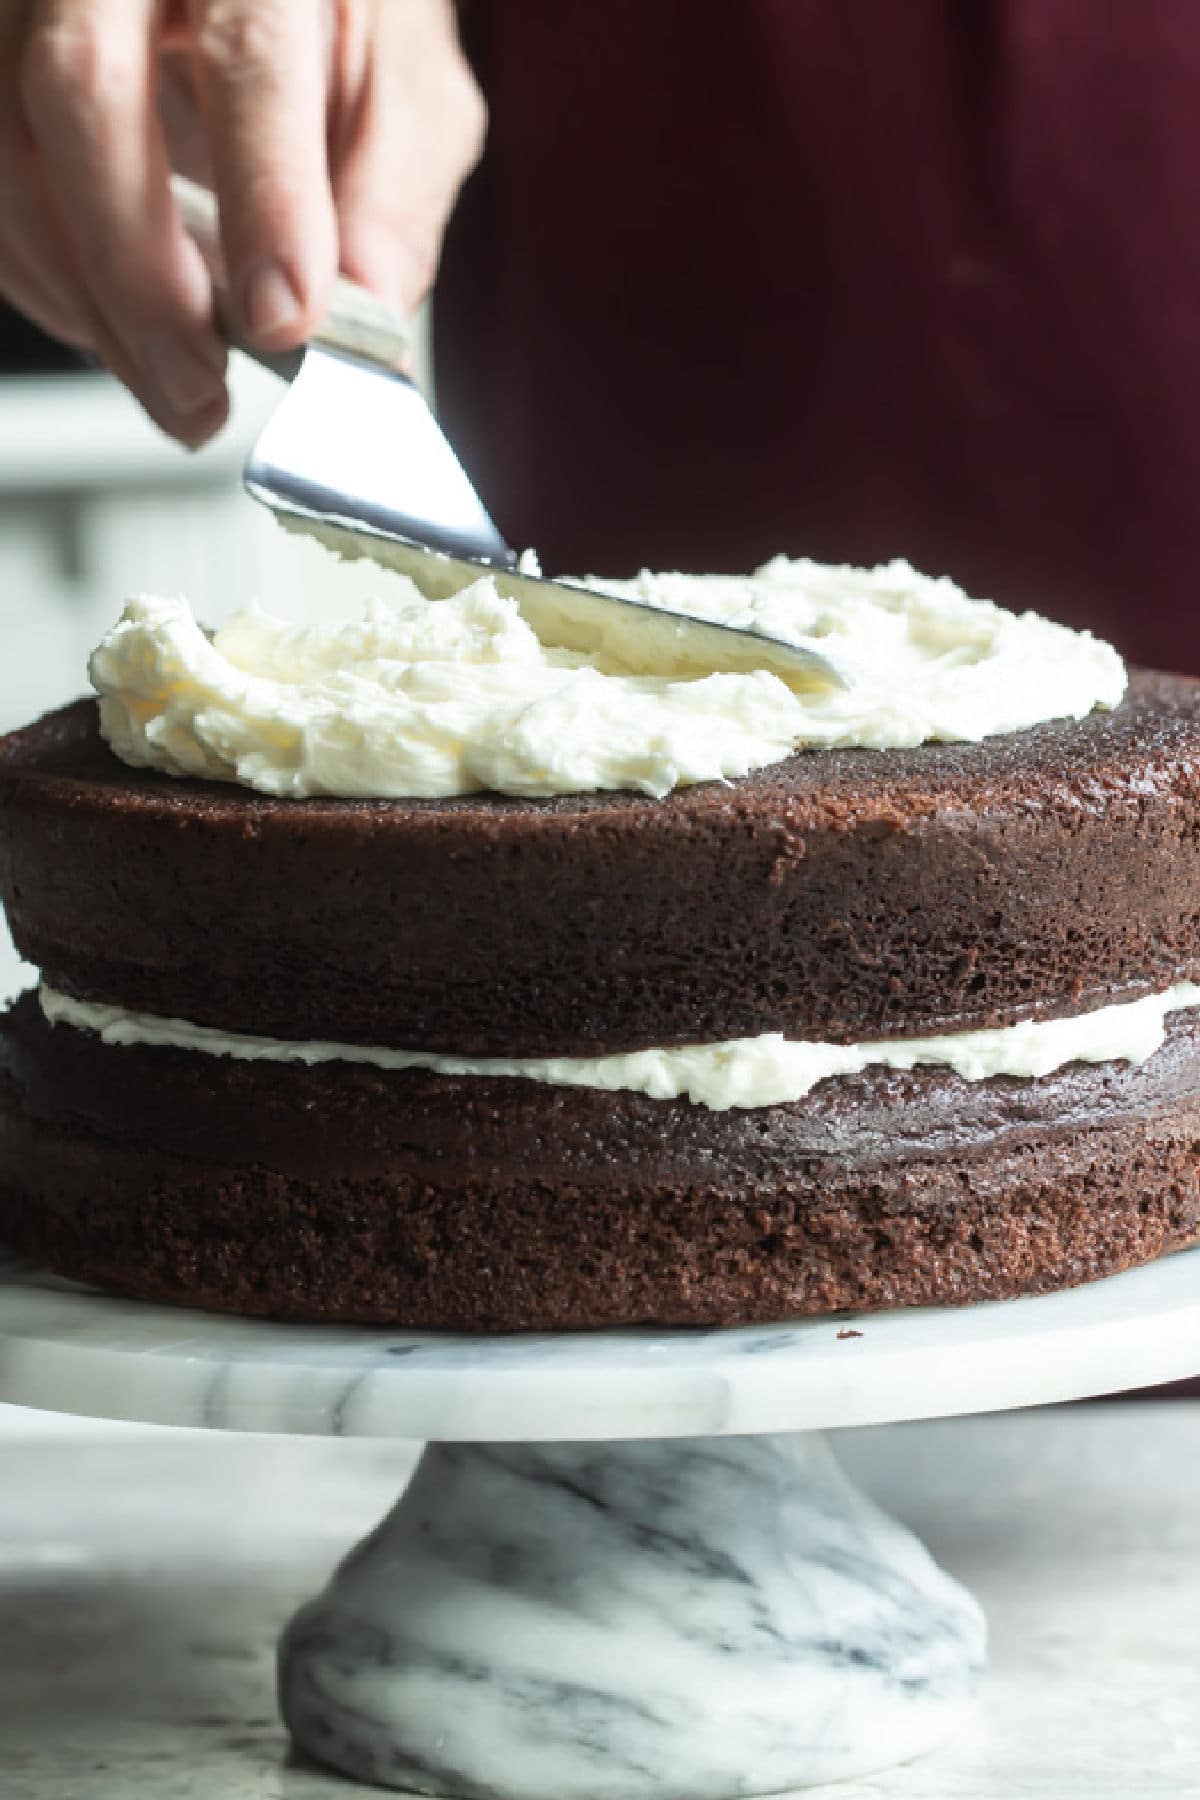 Buttercream frosting being spread on a chocolate layer cake.